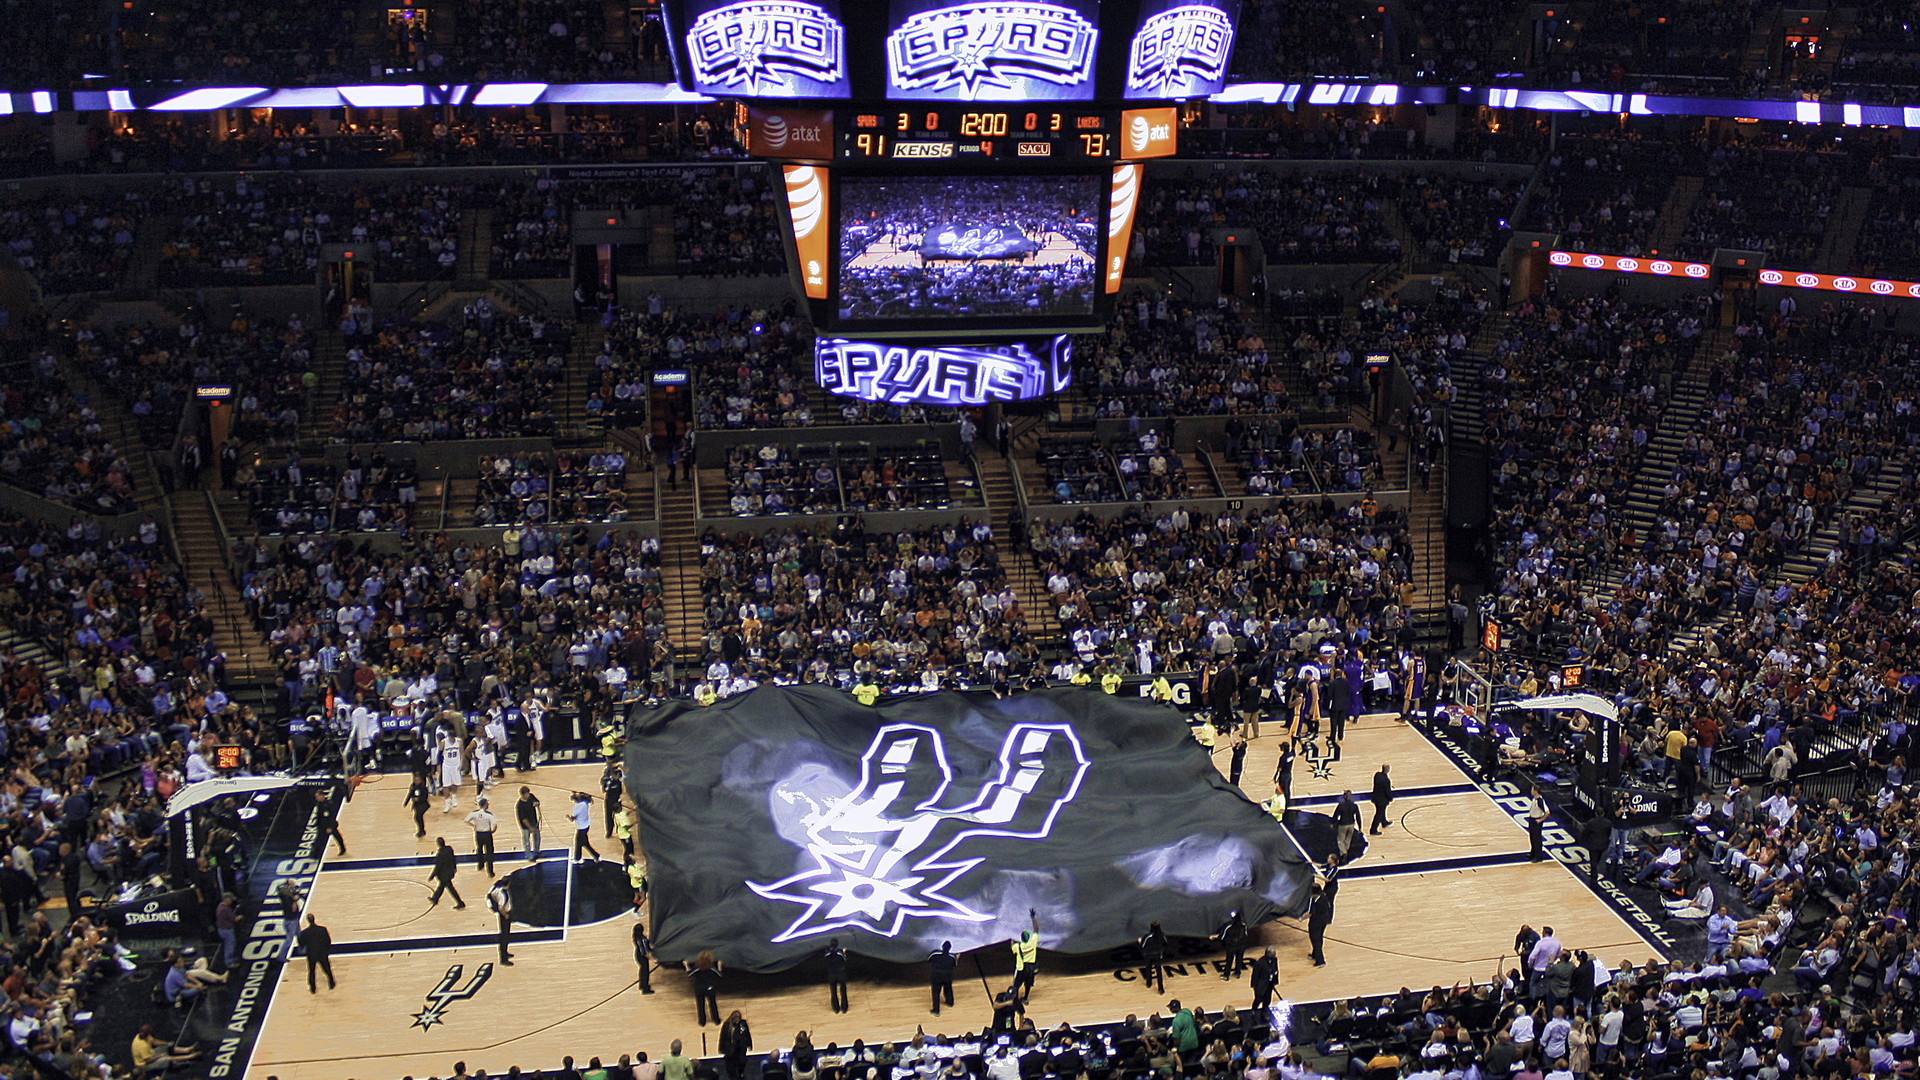 San Antonio Spurs For PC Wallpaper with high-resolution 1920x1080 pixel. You can use this wallpaper for your Desktop Computer Backgrounds, Windows or Mac Screensavers, iPhone Lock screen, Tablet or Android and another Mobile Phone device